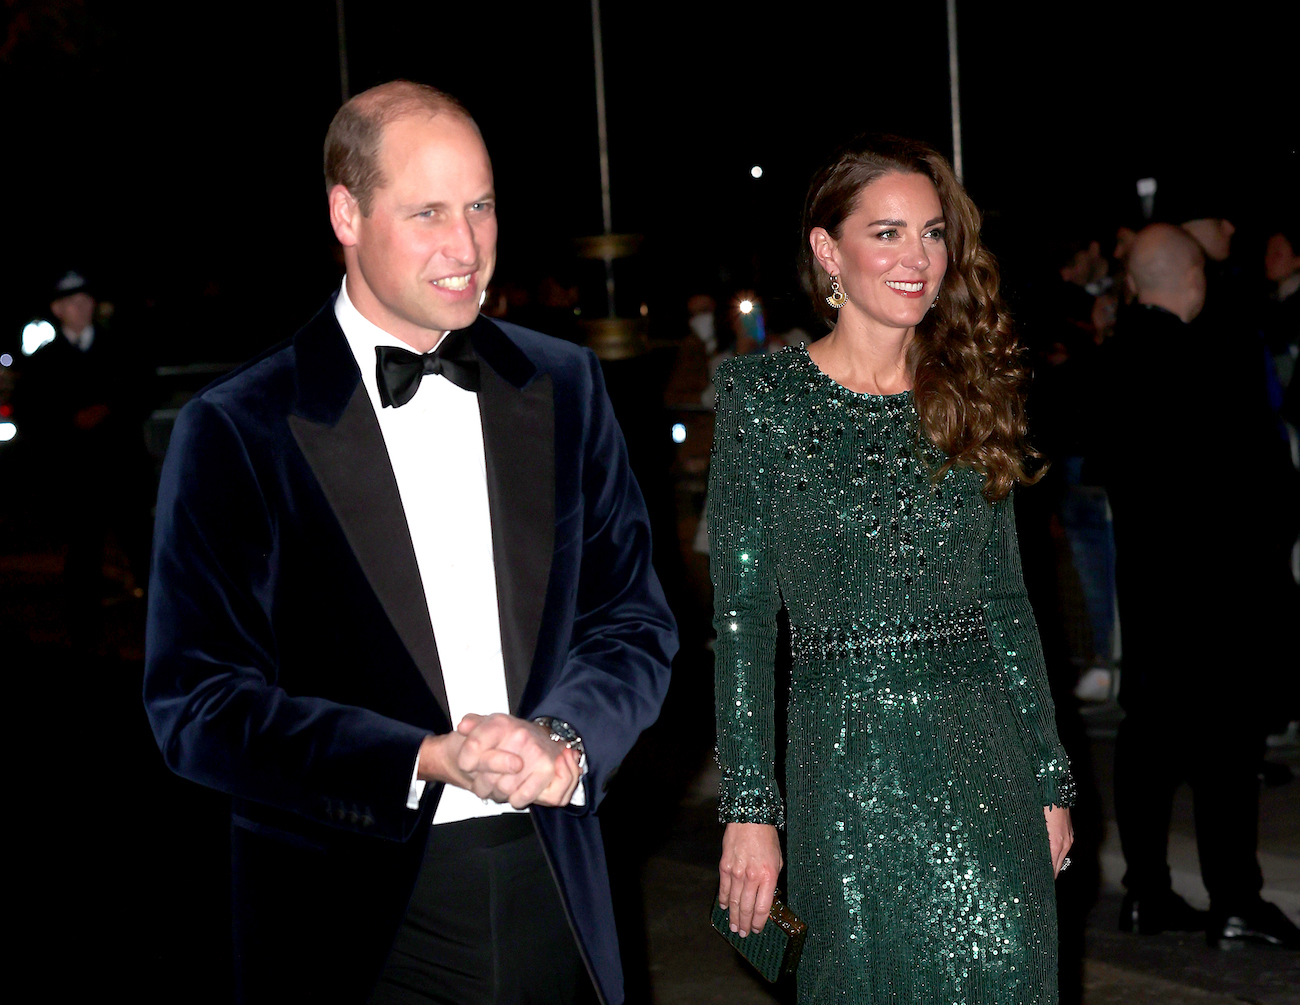 Prince William wears a tuxedo as he walks next to Kate Middleton in a green sequin gown